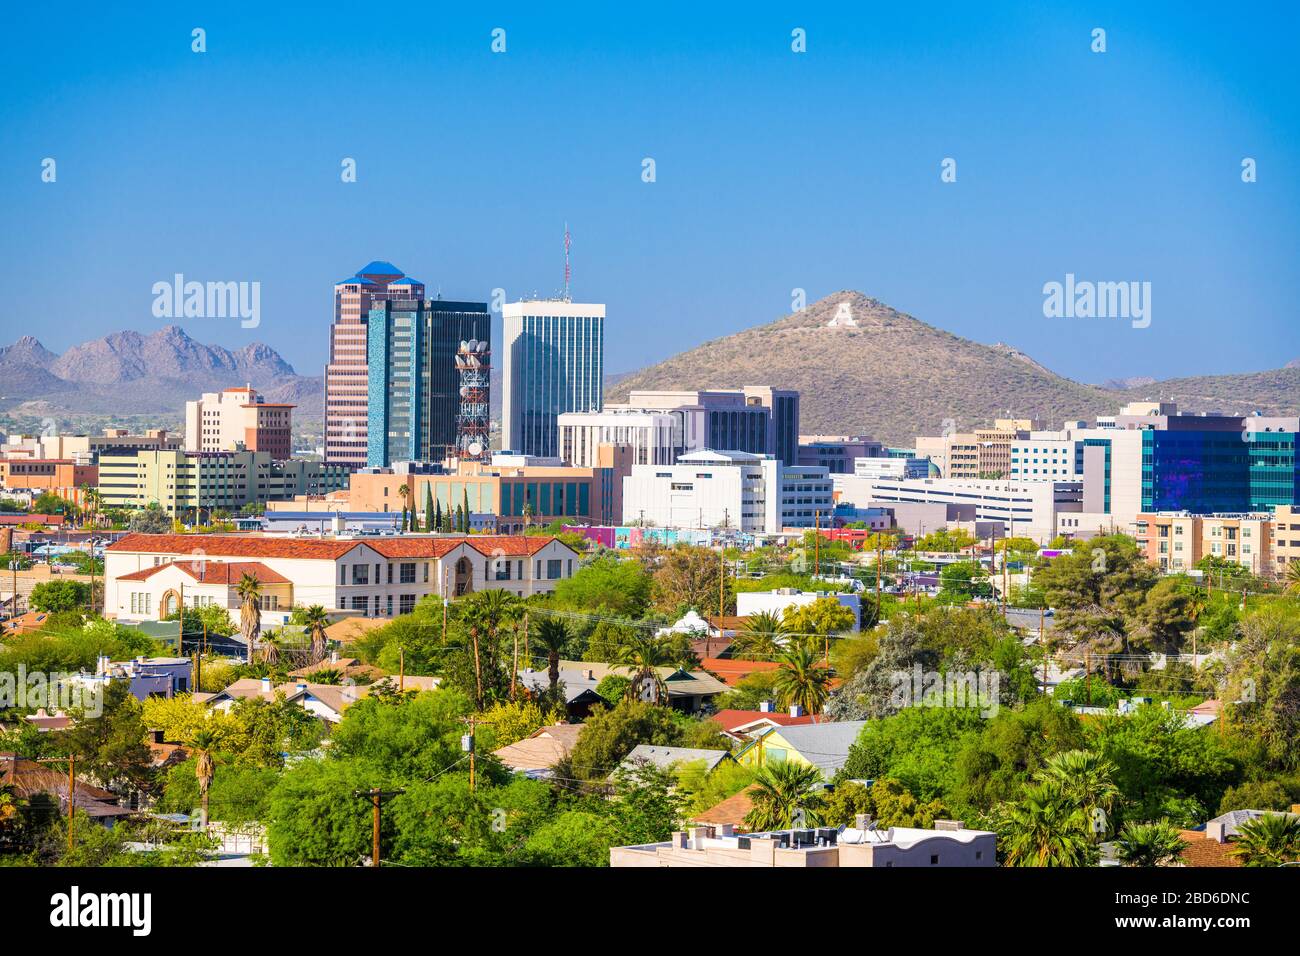 Tucson, Arizona, USA downtown city skyline in the afternoon. Stock Photo